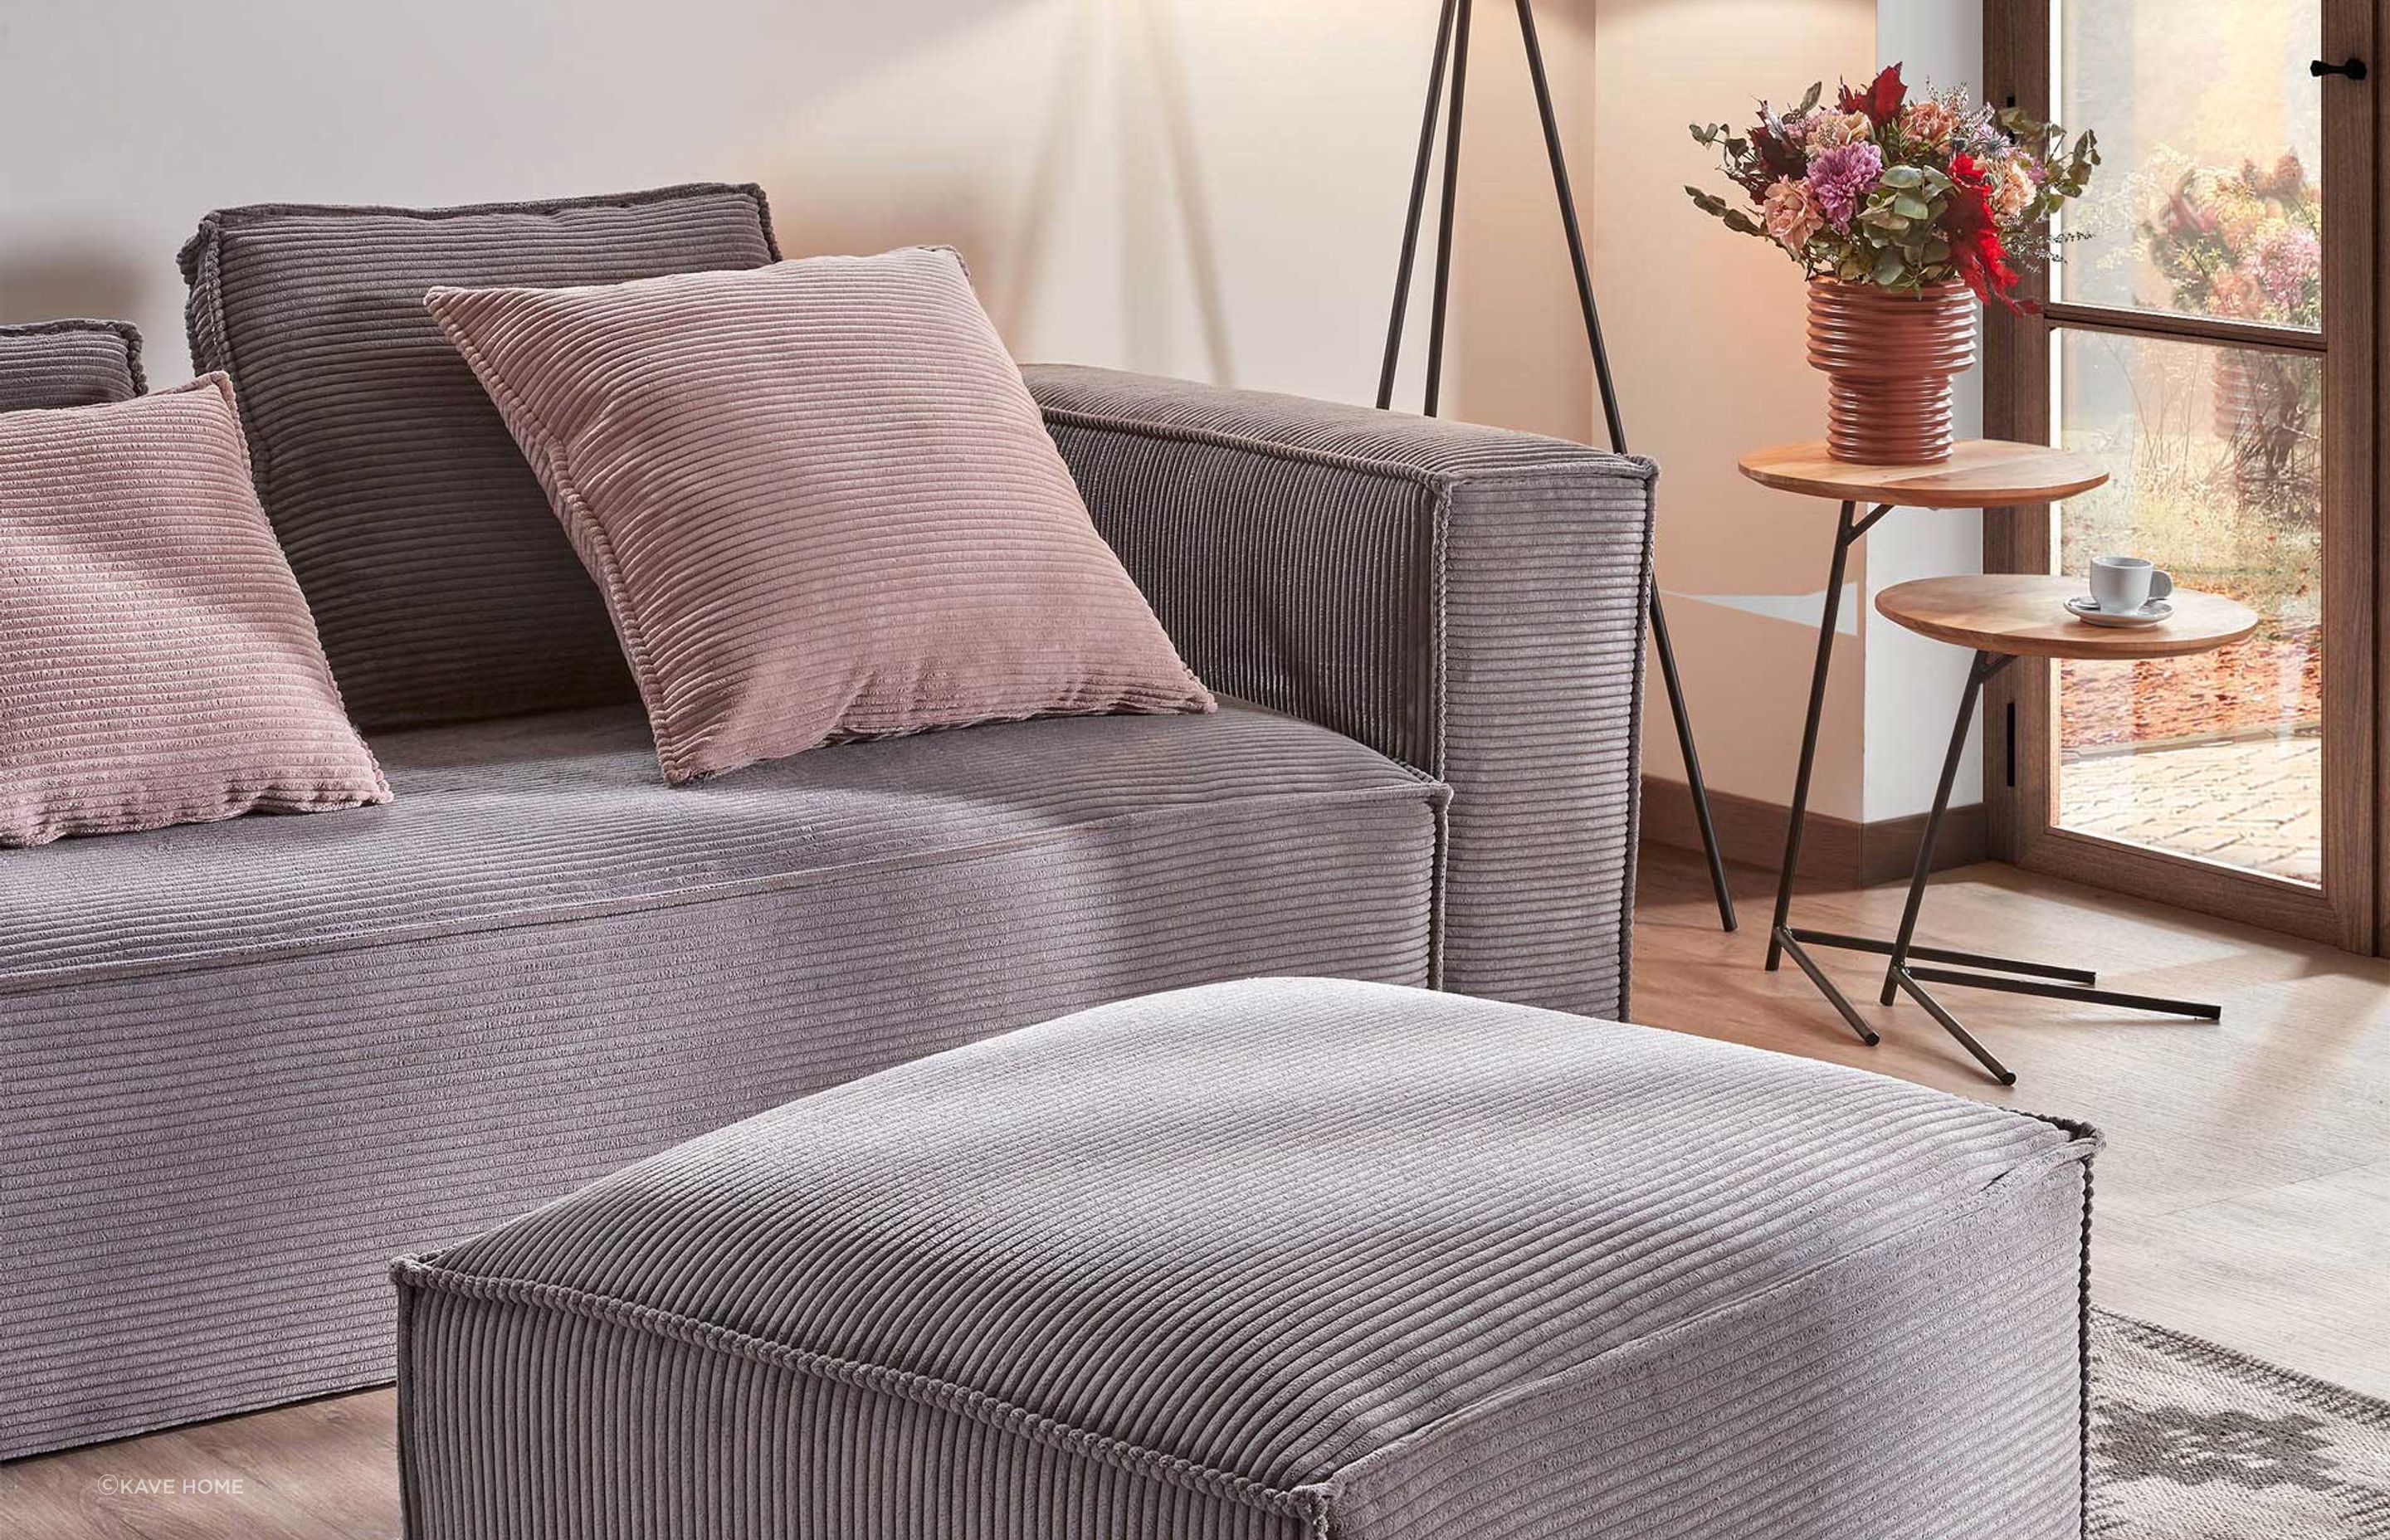 Pretty in pink: Bright pink pillows add warmth to this Kave Home grey sofa.